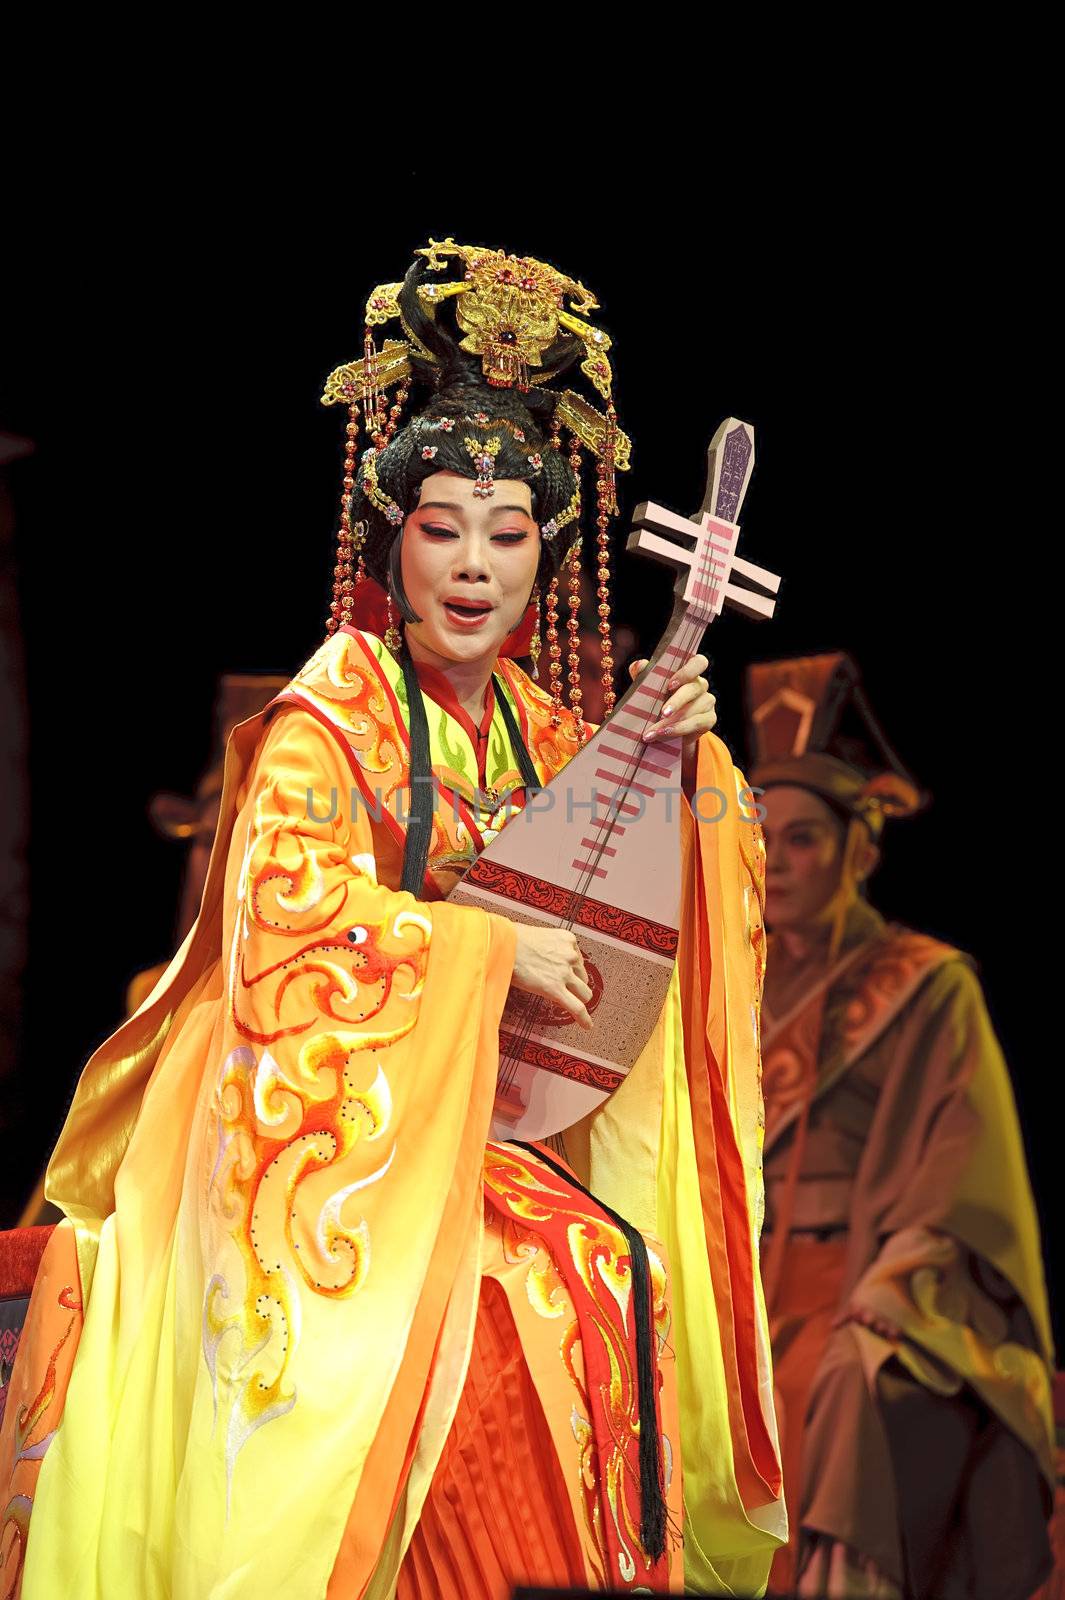 CHENGDU - JUN 6: Chinese Gaojia Opera performer make a show on stage to compete for awards in 25th Chinese Drama Plum Blossom Award competition at Jinsha theater.Jun 6, 2011 in Chengdu, China.
Chinese Drama Plum Blossom Award is the highest theatrical award in China.